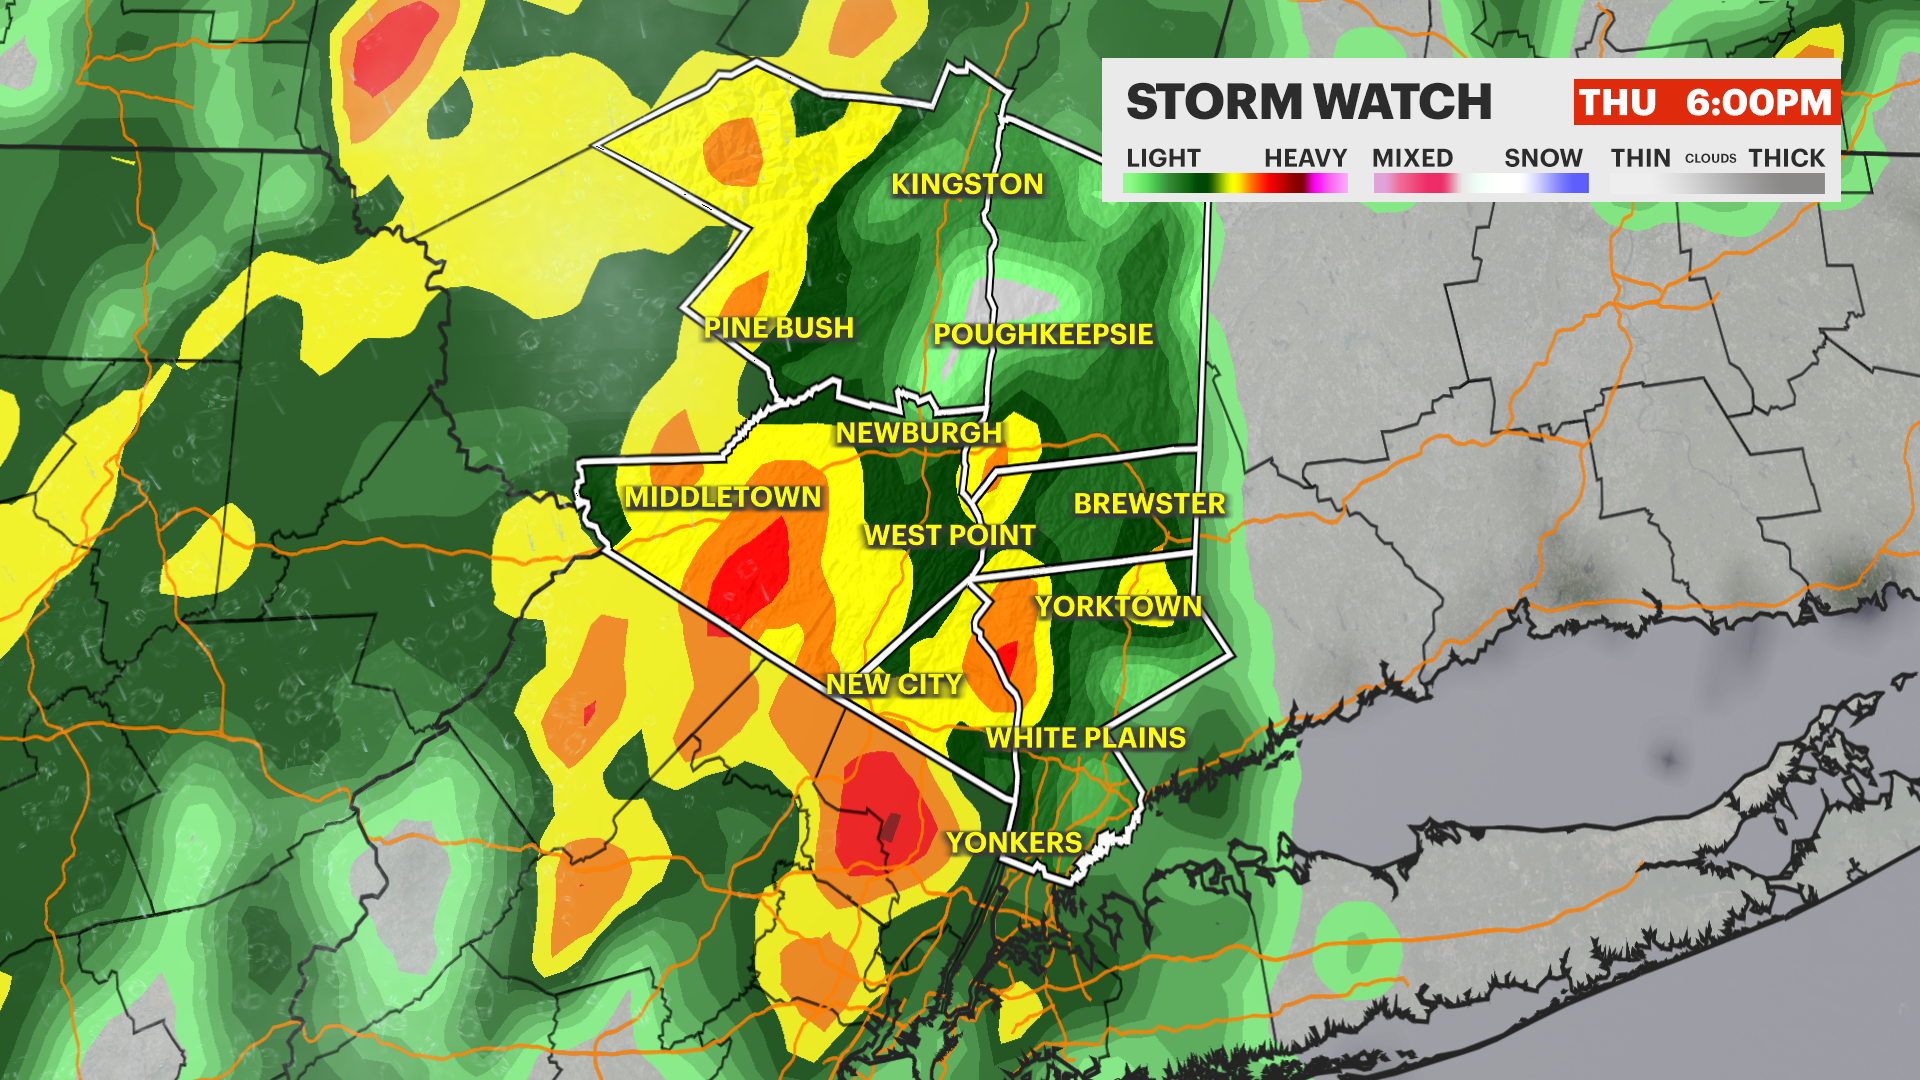 STORM WATCH: Strong storms on Thursday to bring flooding, damaging winds